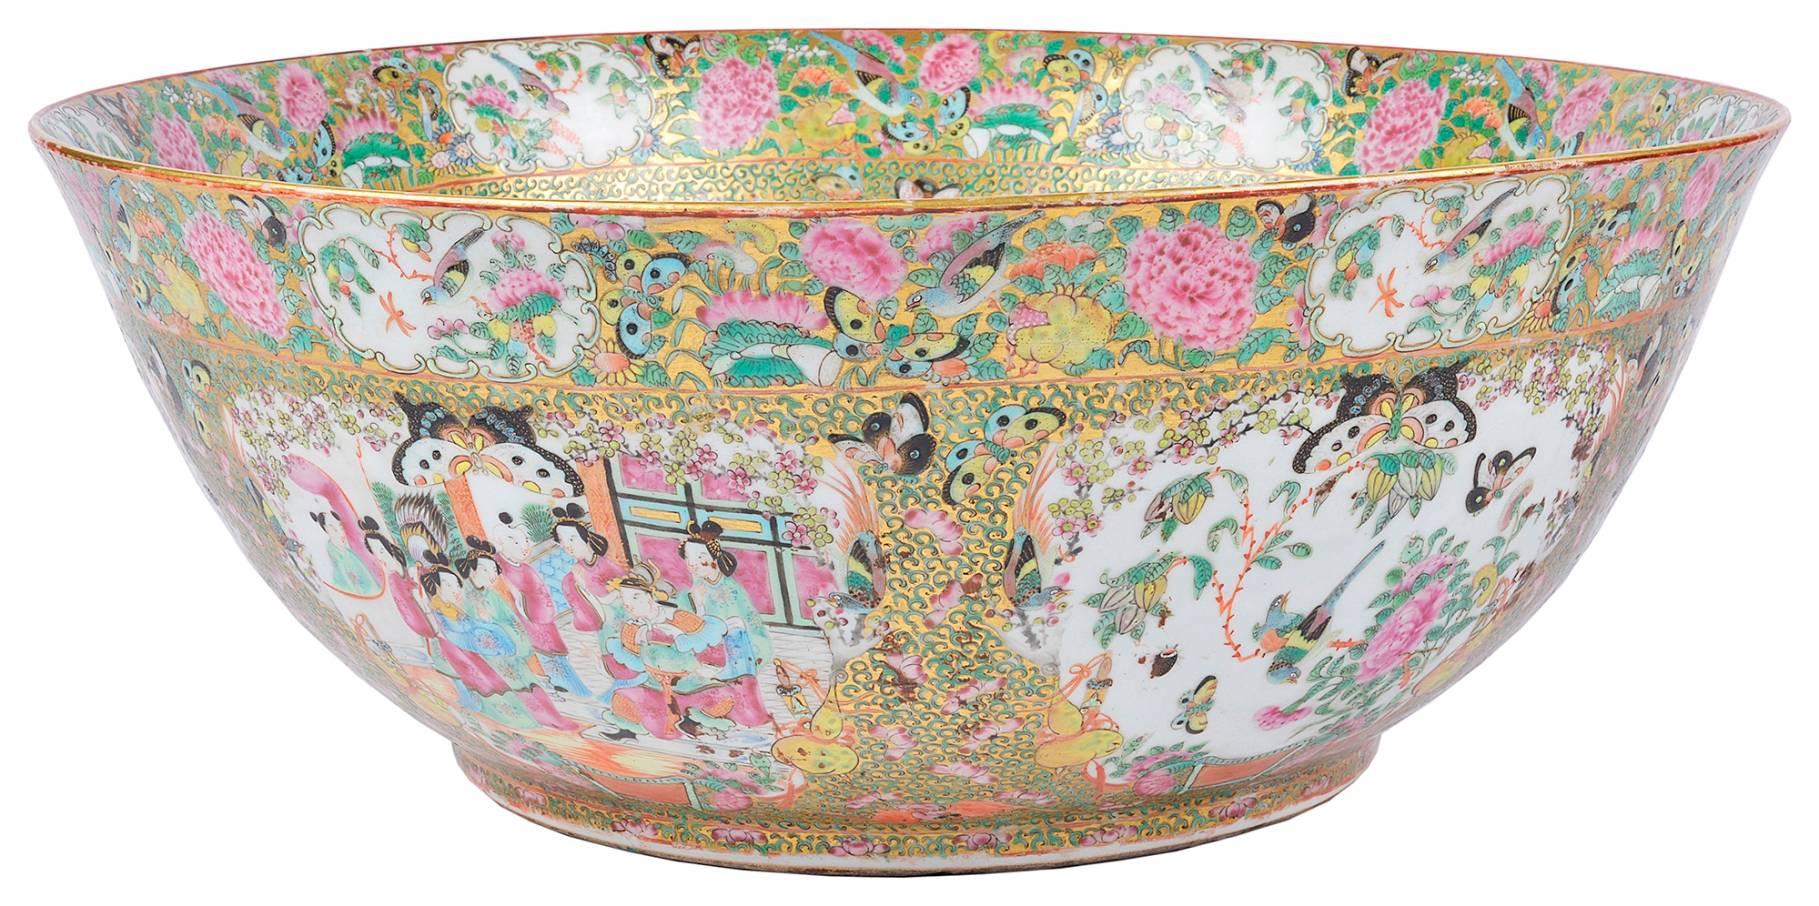 A good quality large 19th century Chinese cantonese/rose medallion bowl. Having classical oriental scenes painted and set in boarders of flowers, birds and butterflies.